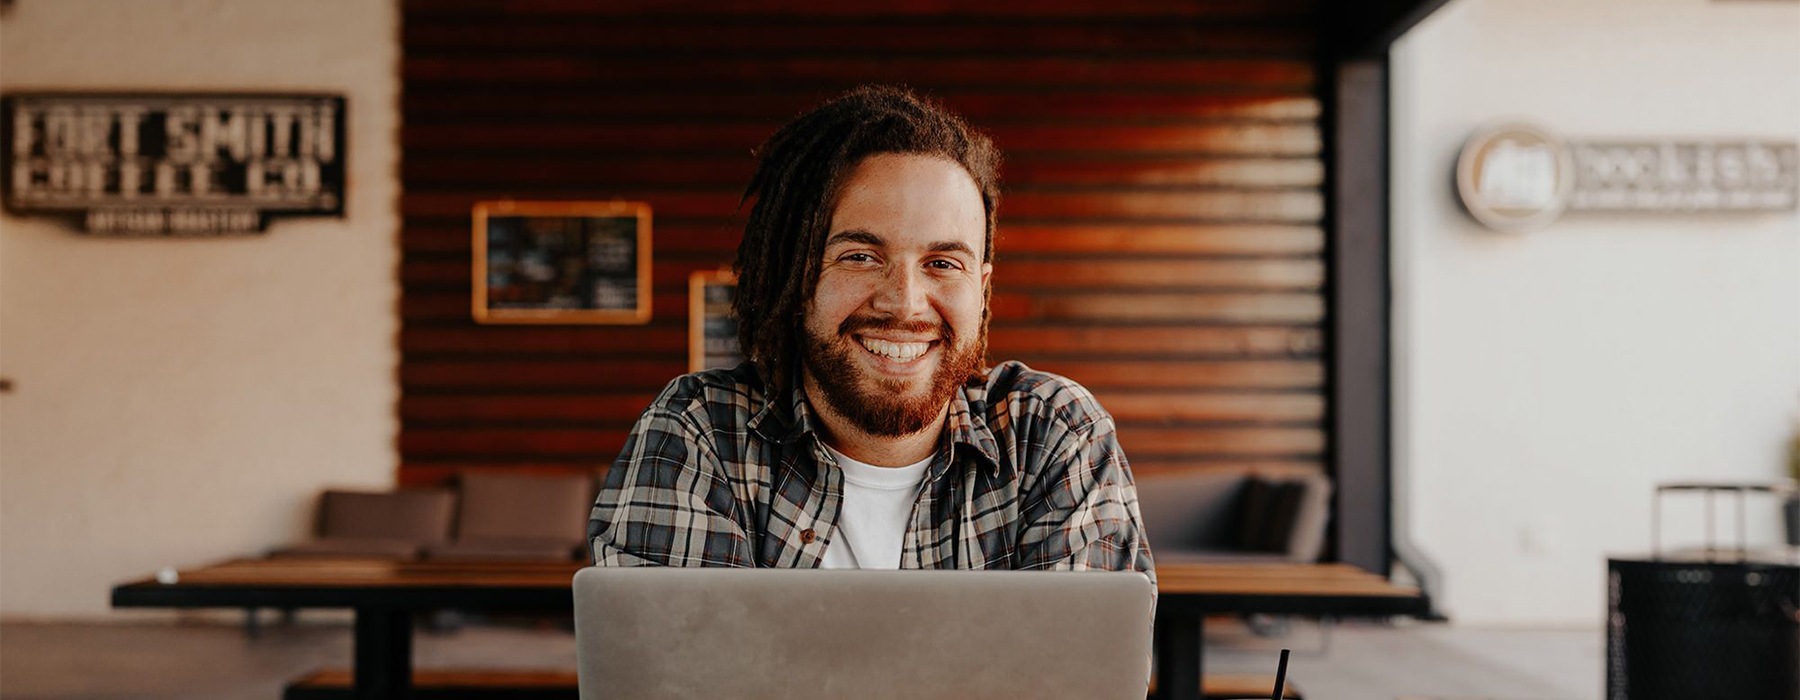 a man smiling in front of a laptop